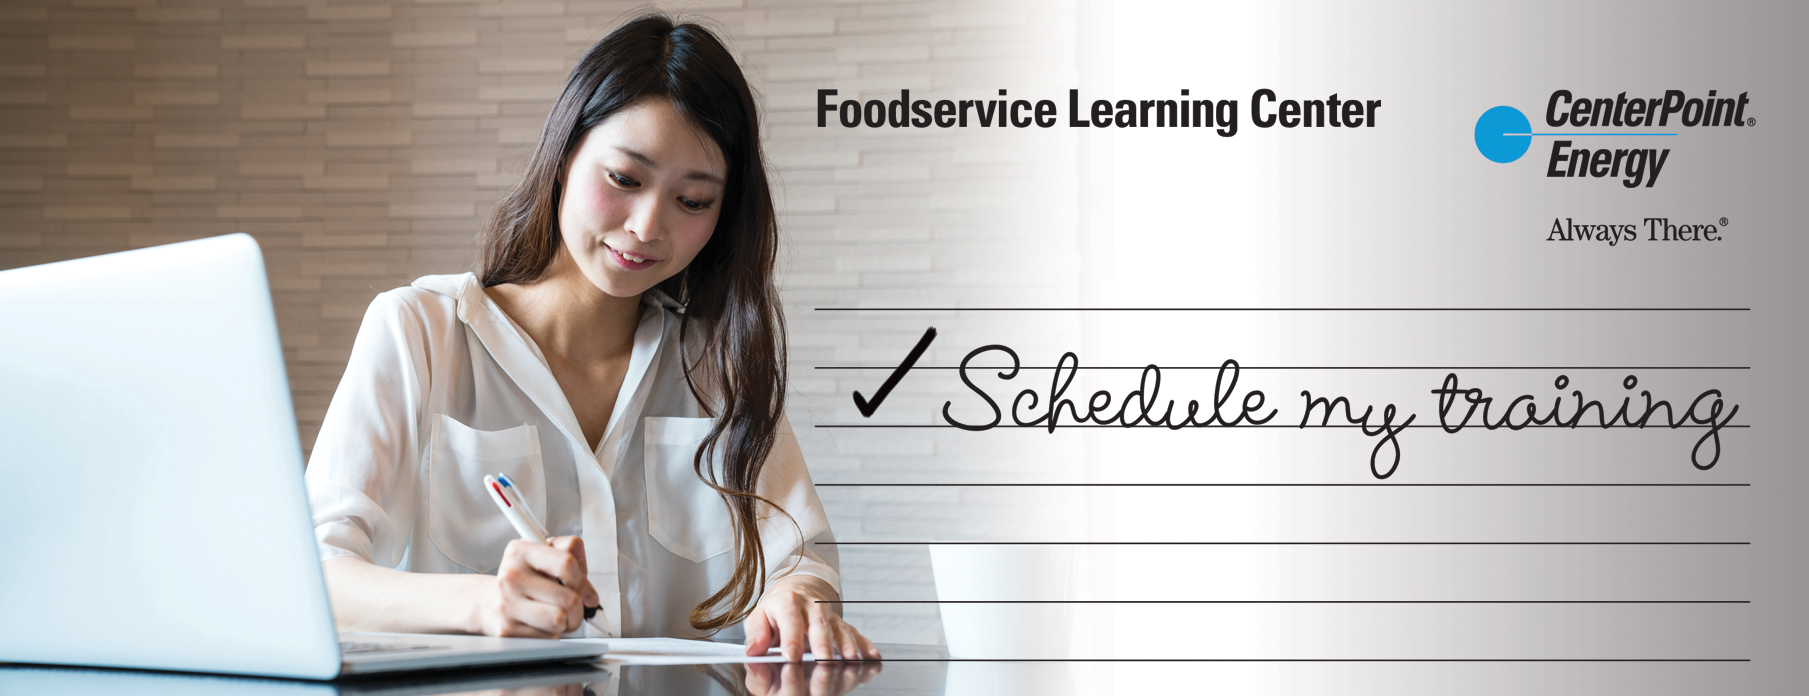 Foodservice Learning Center